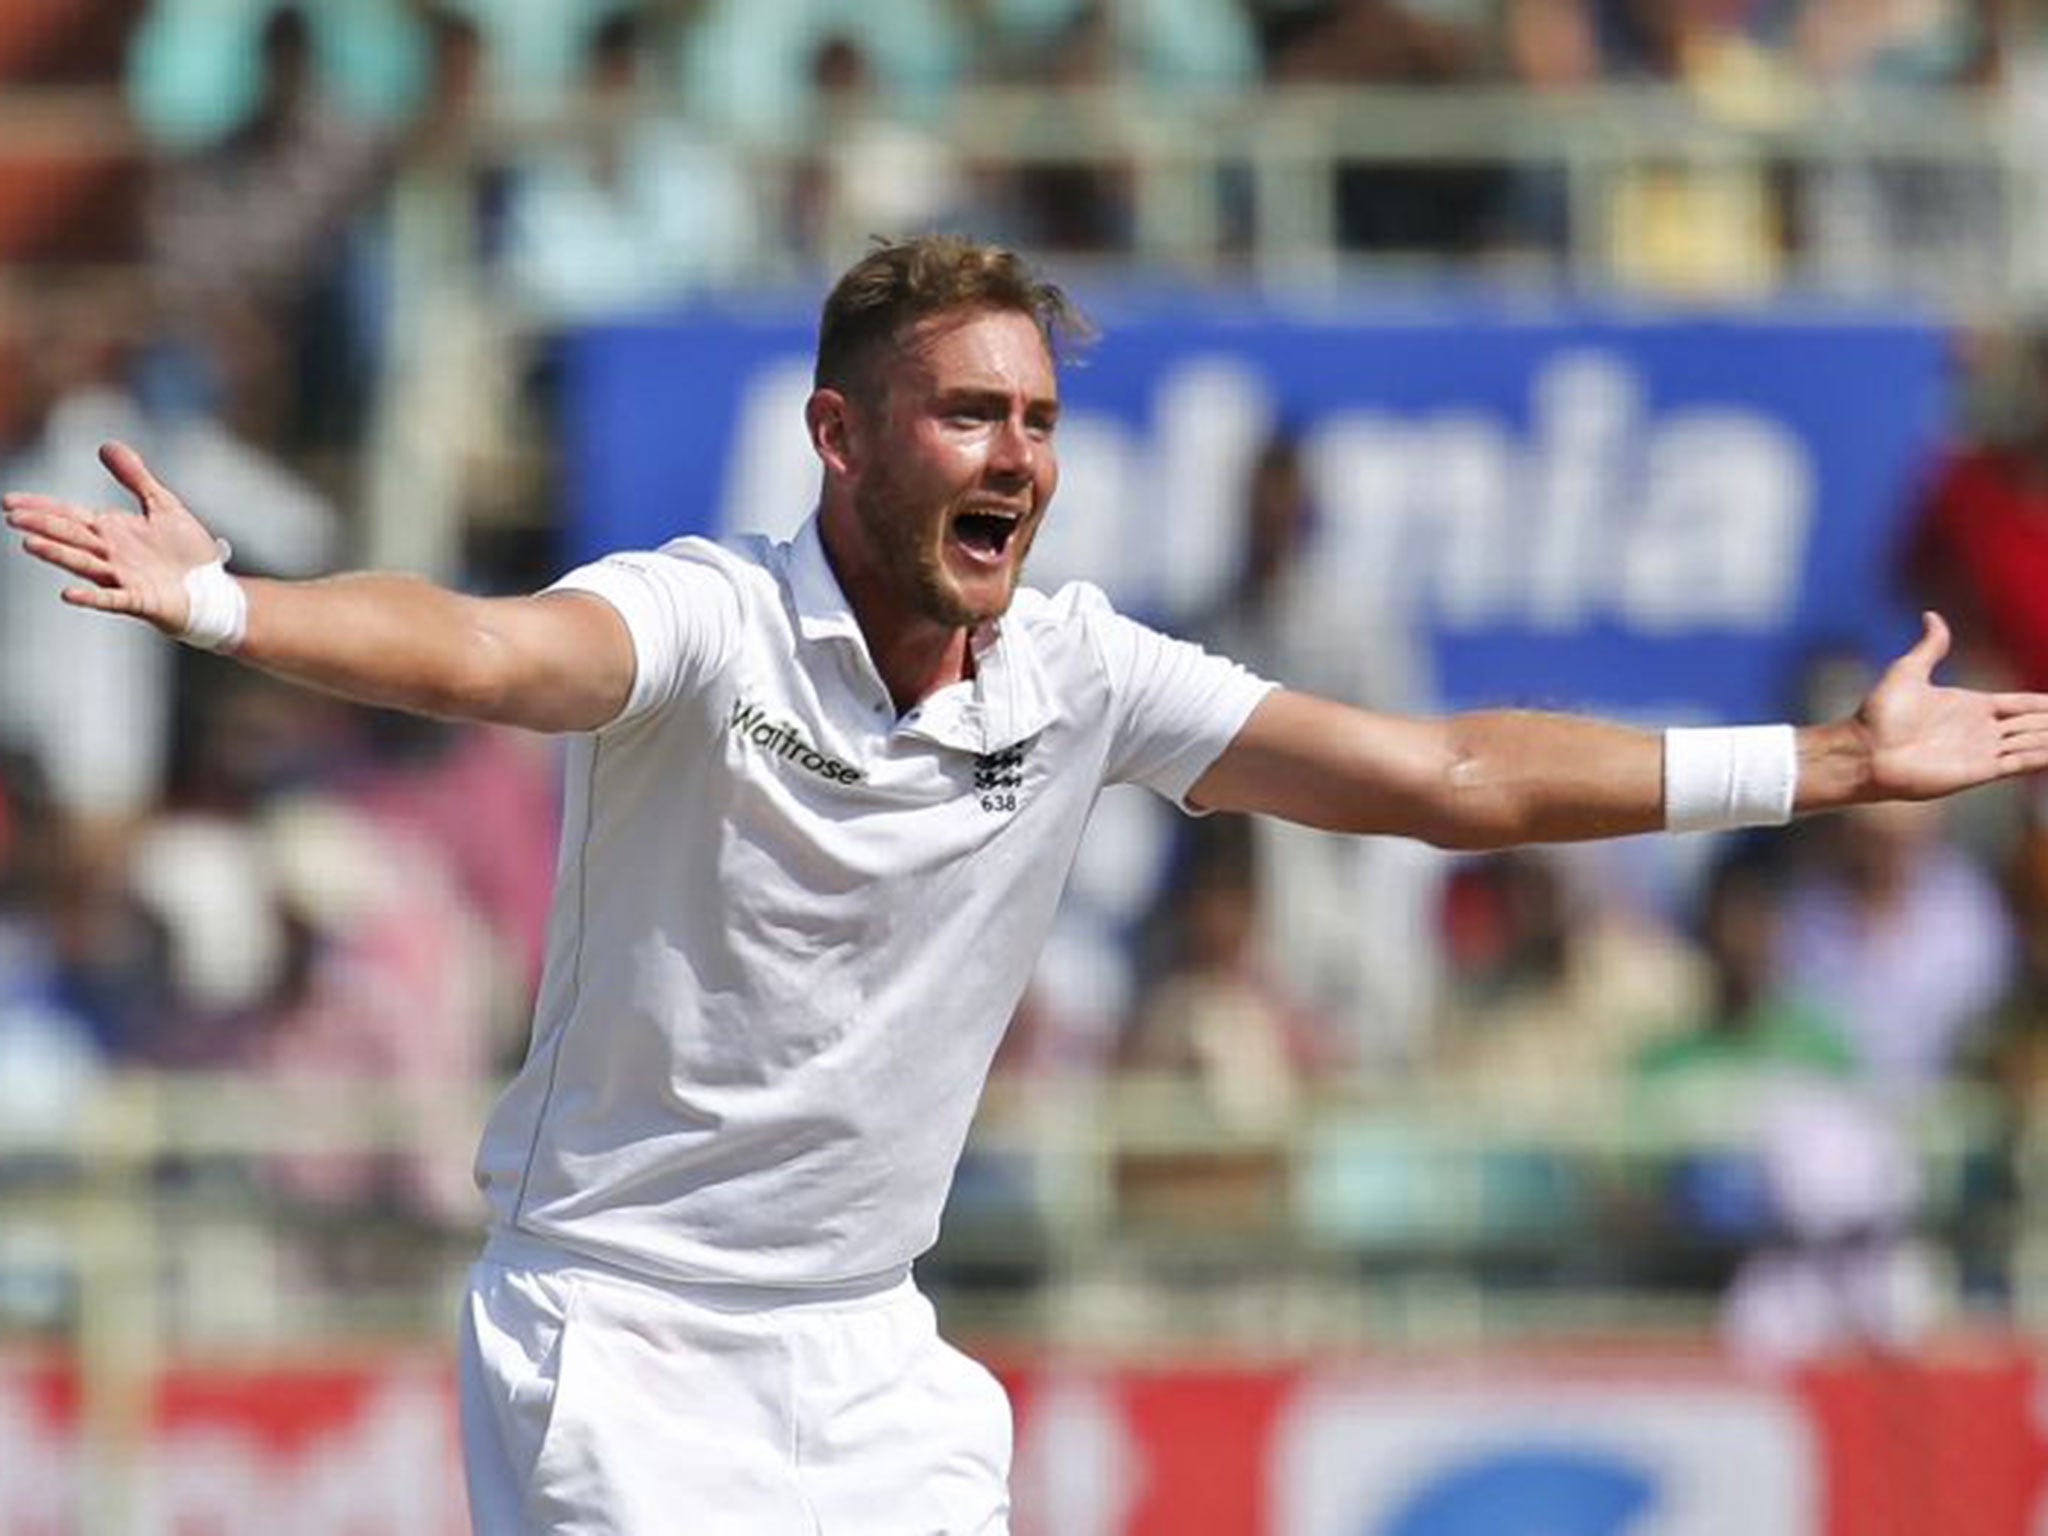 Broad finished India's second innings with four wickets for just 33 runs